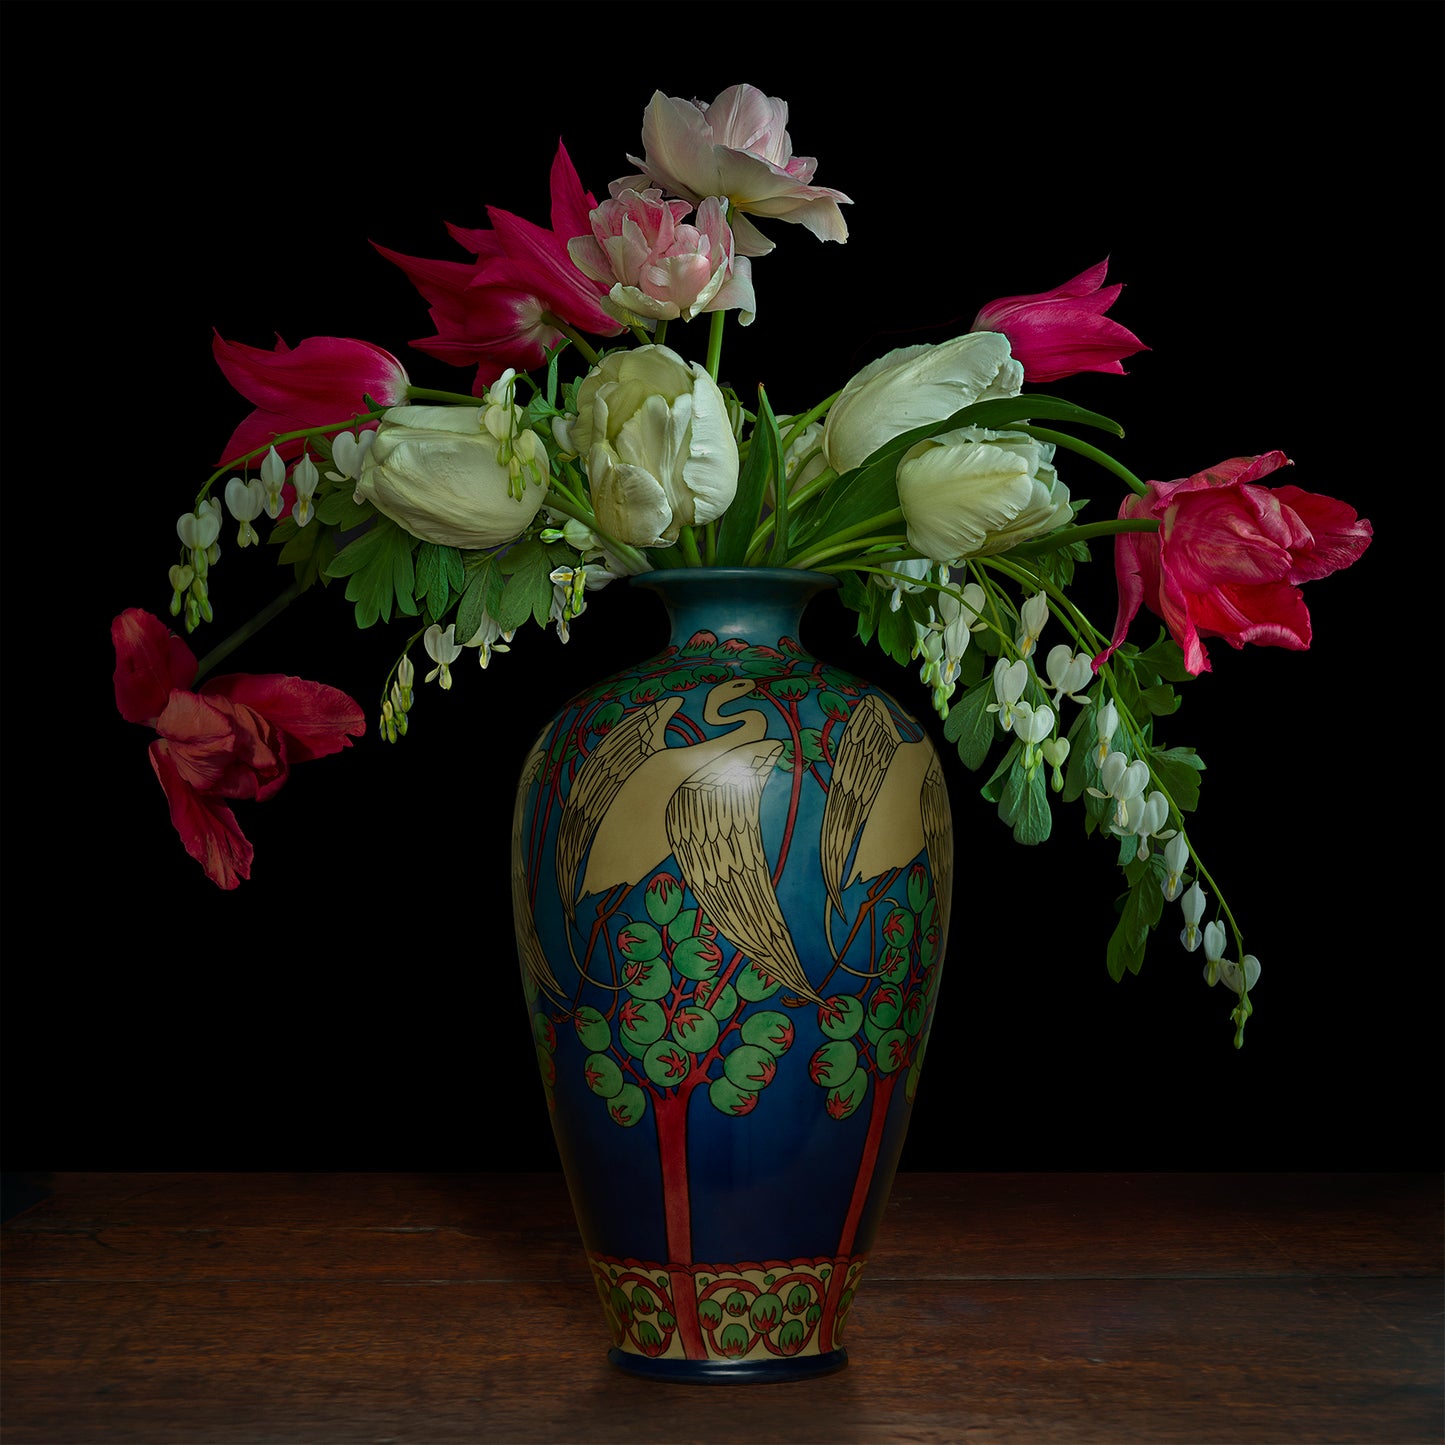 Tulips and Bleeding Hearts in a Japanese Vessel (Vessesl courtesy Gardiner Museum)